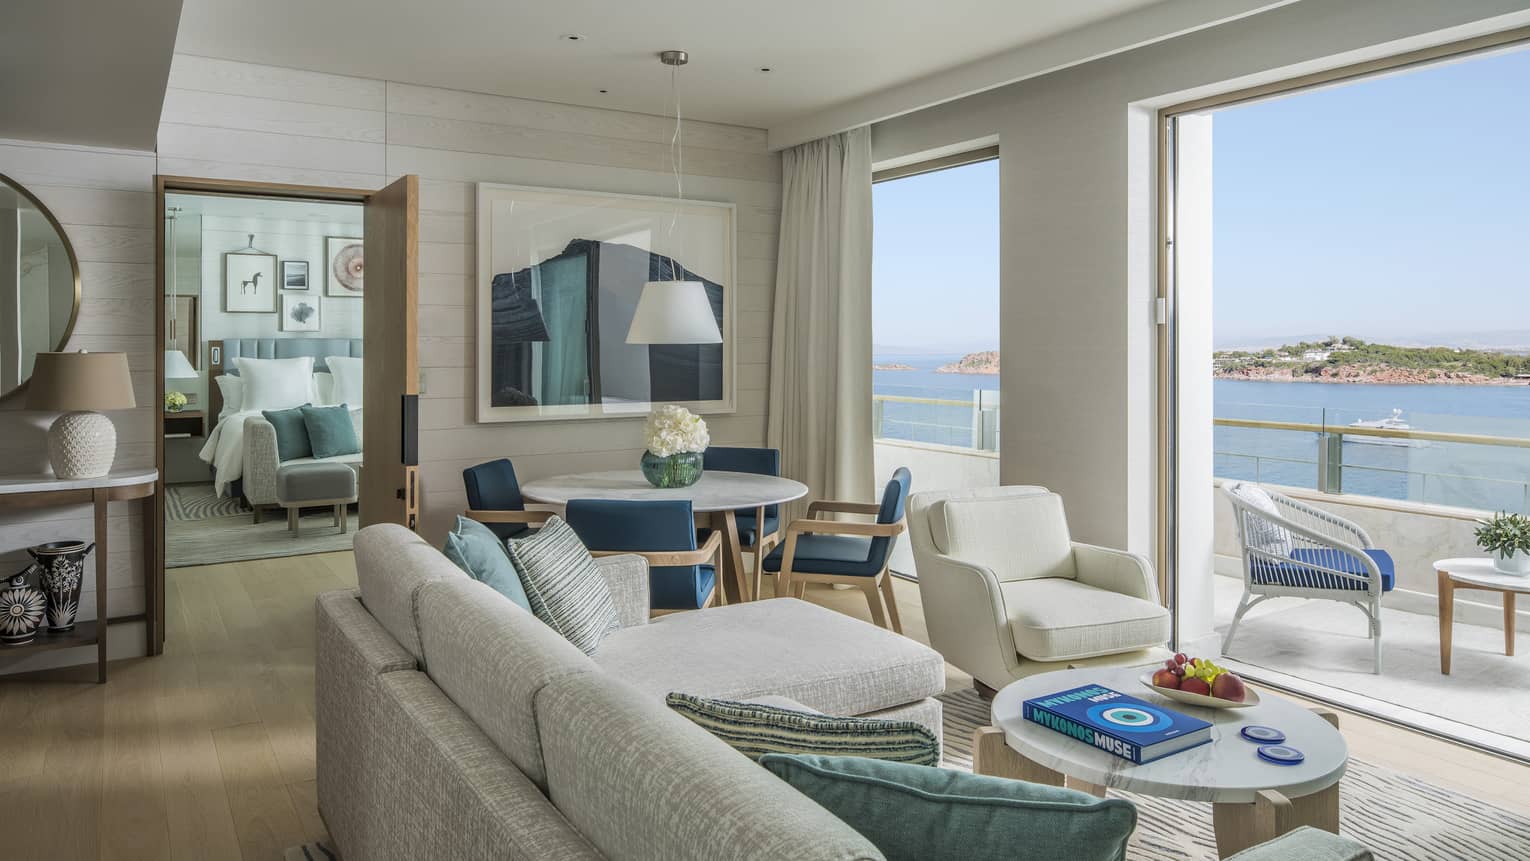 Light-filled living room with off-white sofa and arm chair, plus dining area, looking out to sea